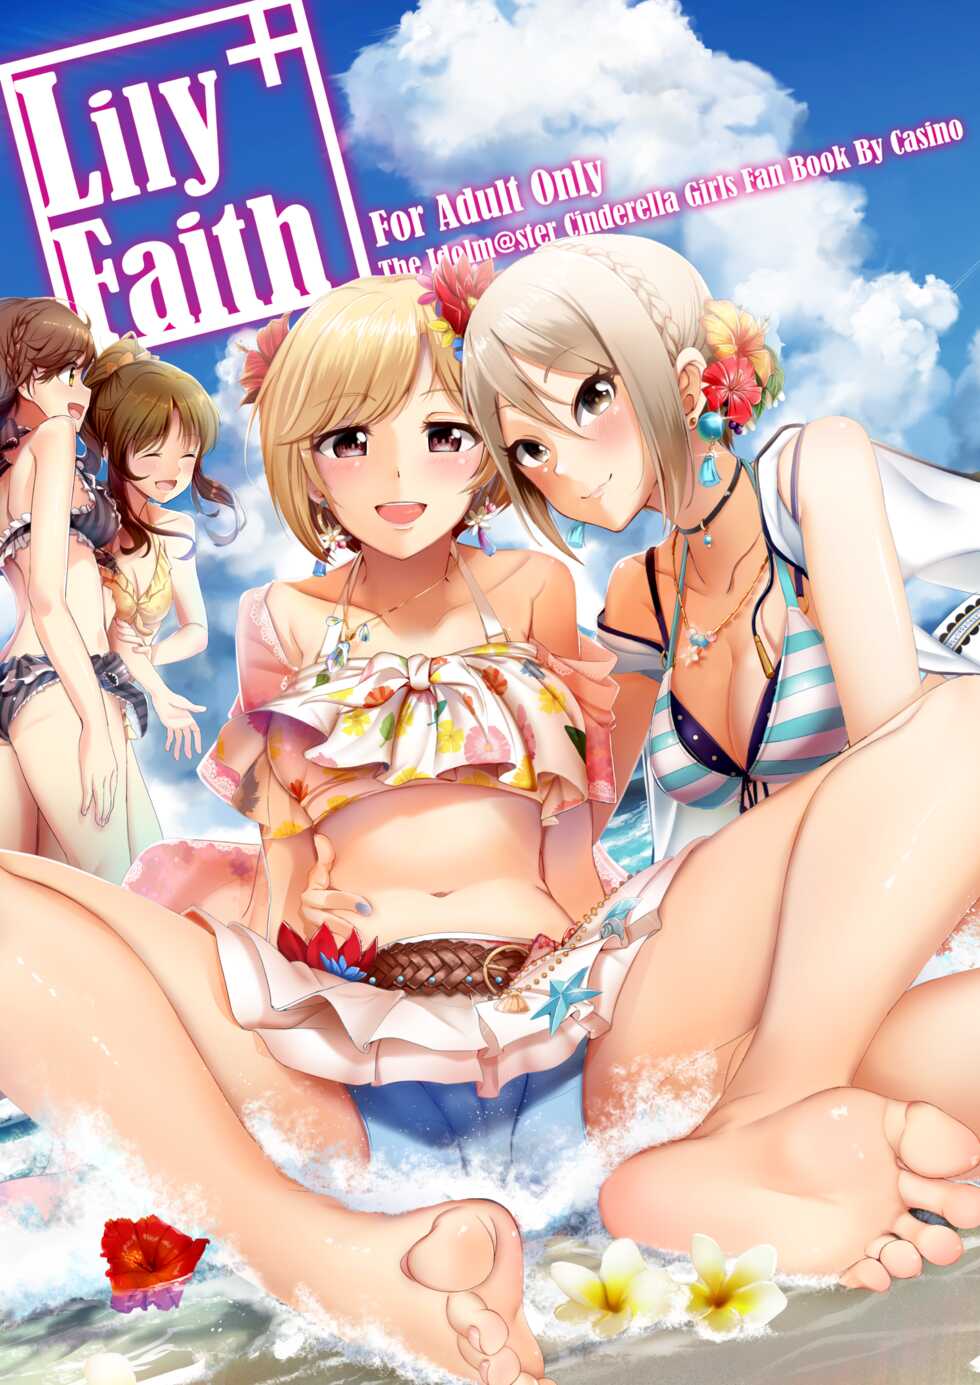 [DiceBomb (Casino)] Lily Faith+ (THE IDOLM@STER CINDERELLA GIRLS) [Decensored] [Digital] - Page 2